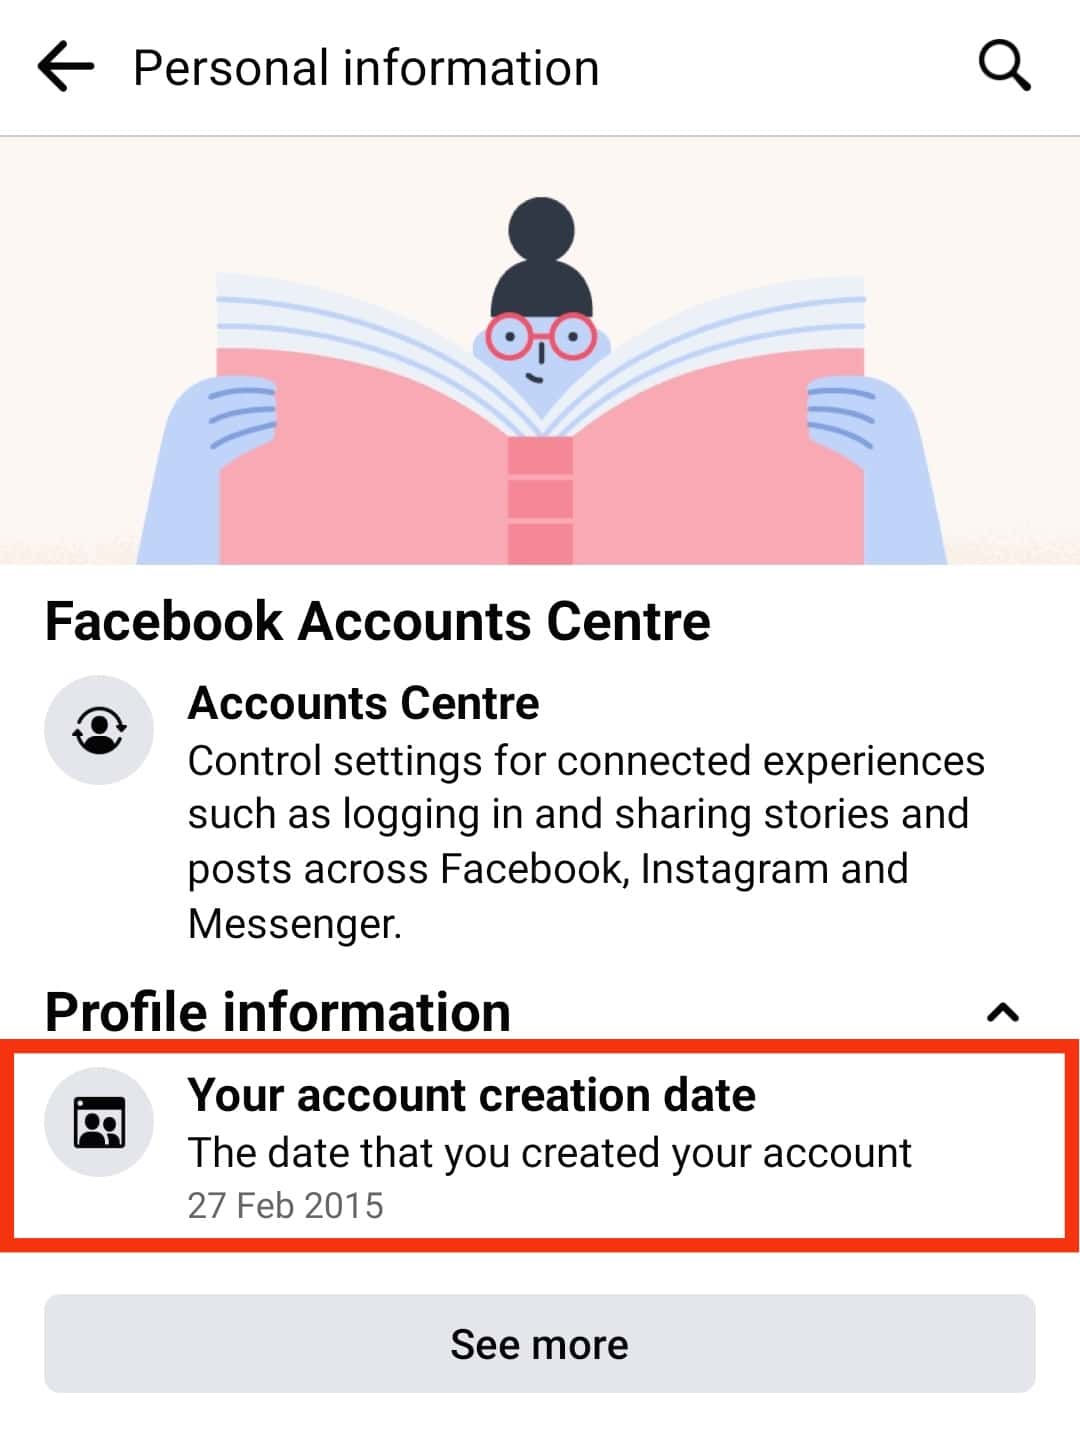 You Will See Your Account Creation Date